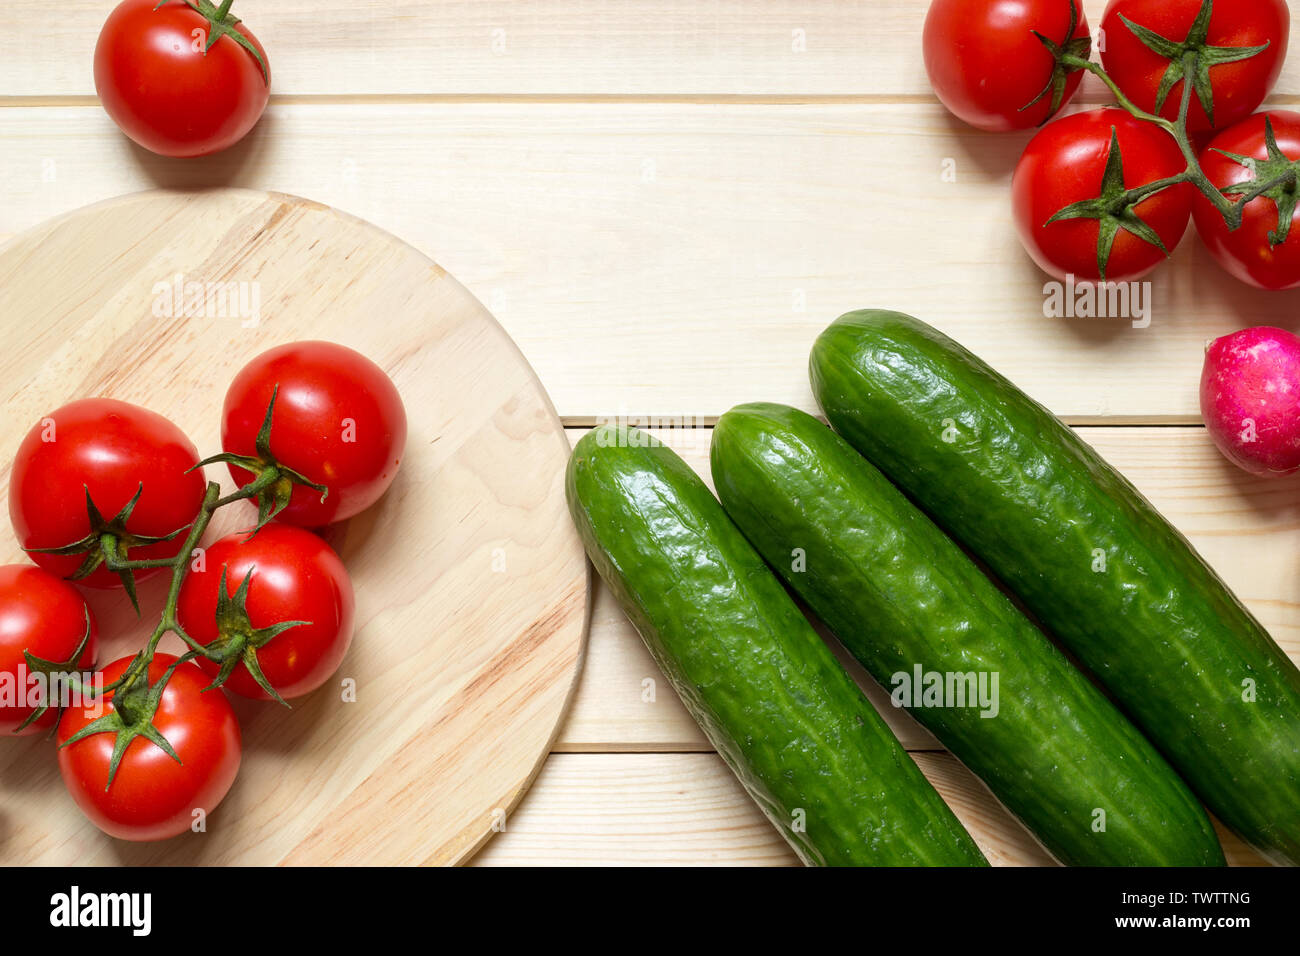 Fresh organic food ingredients on kitchen wooden table. Red cherry tomatoes, green cucumbers and radish. Round kitchen board. Fresh vegetables. Raw fo Stock Photo